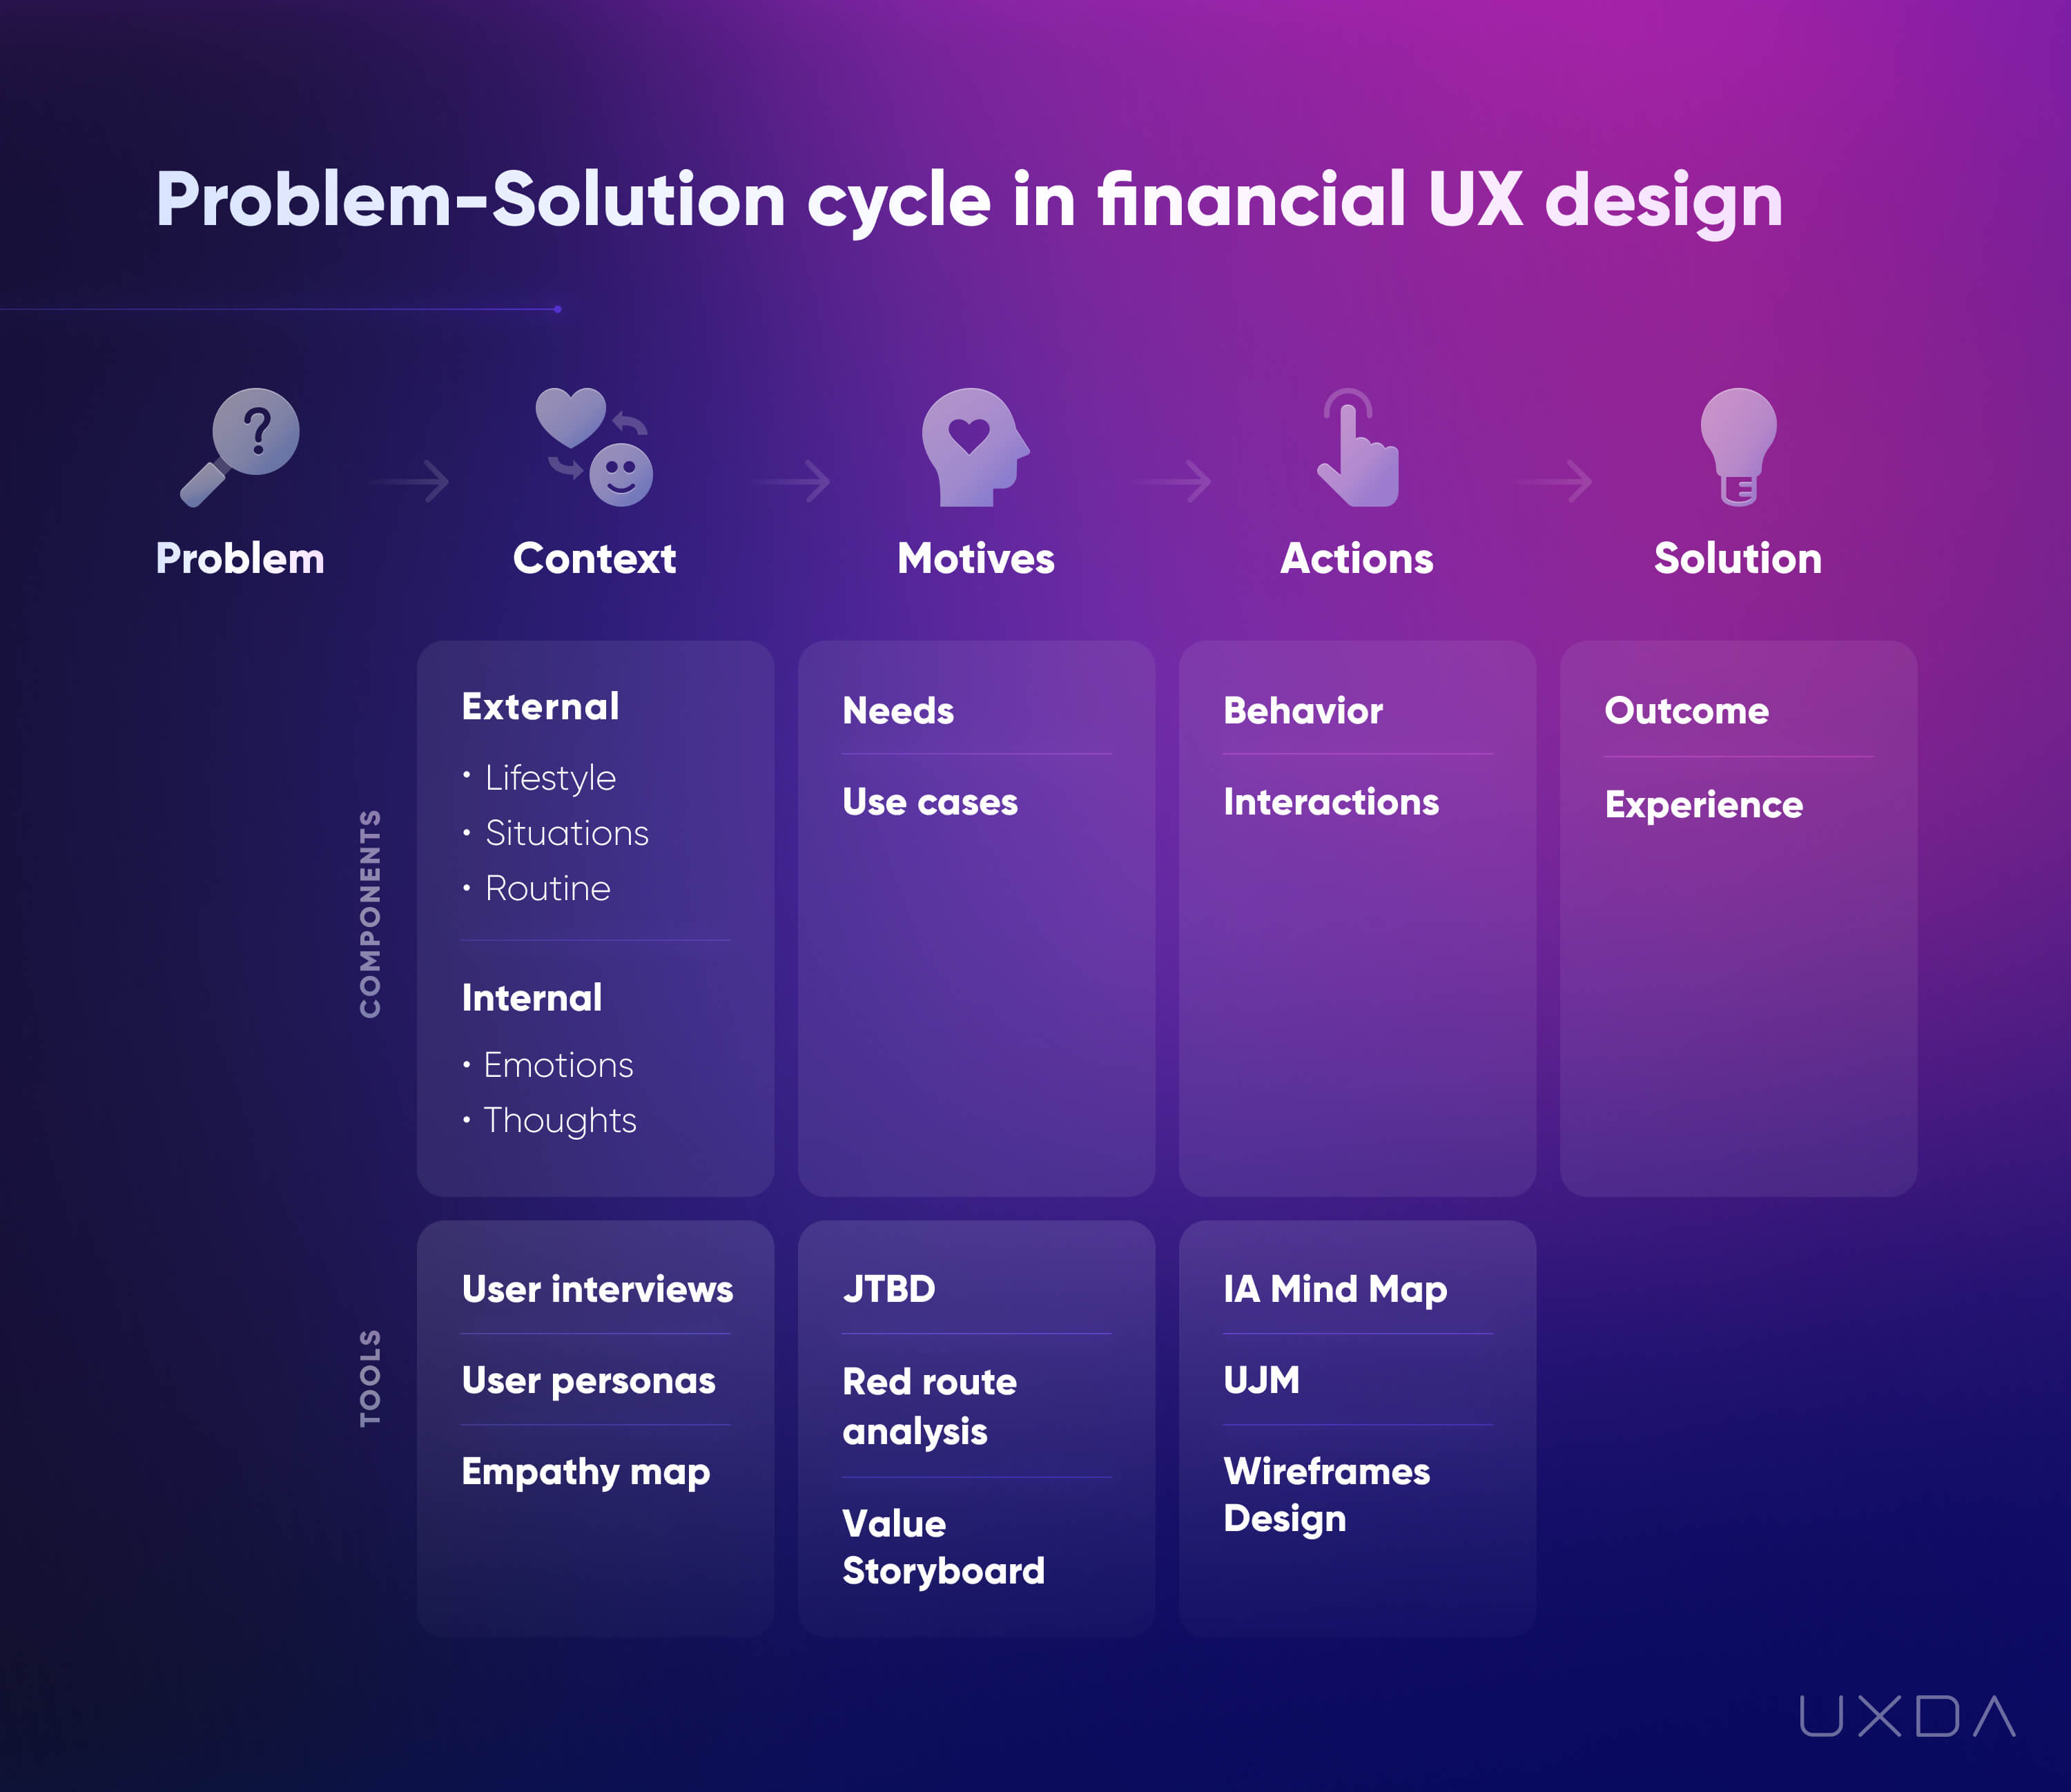 Banking CX Insights Design Better Digital Products UX problem solution cycle